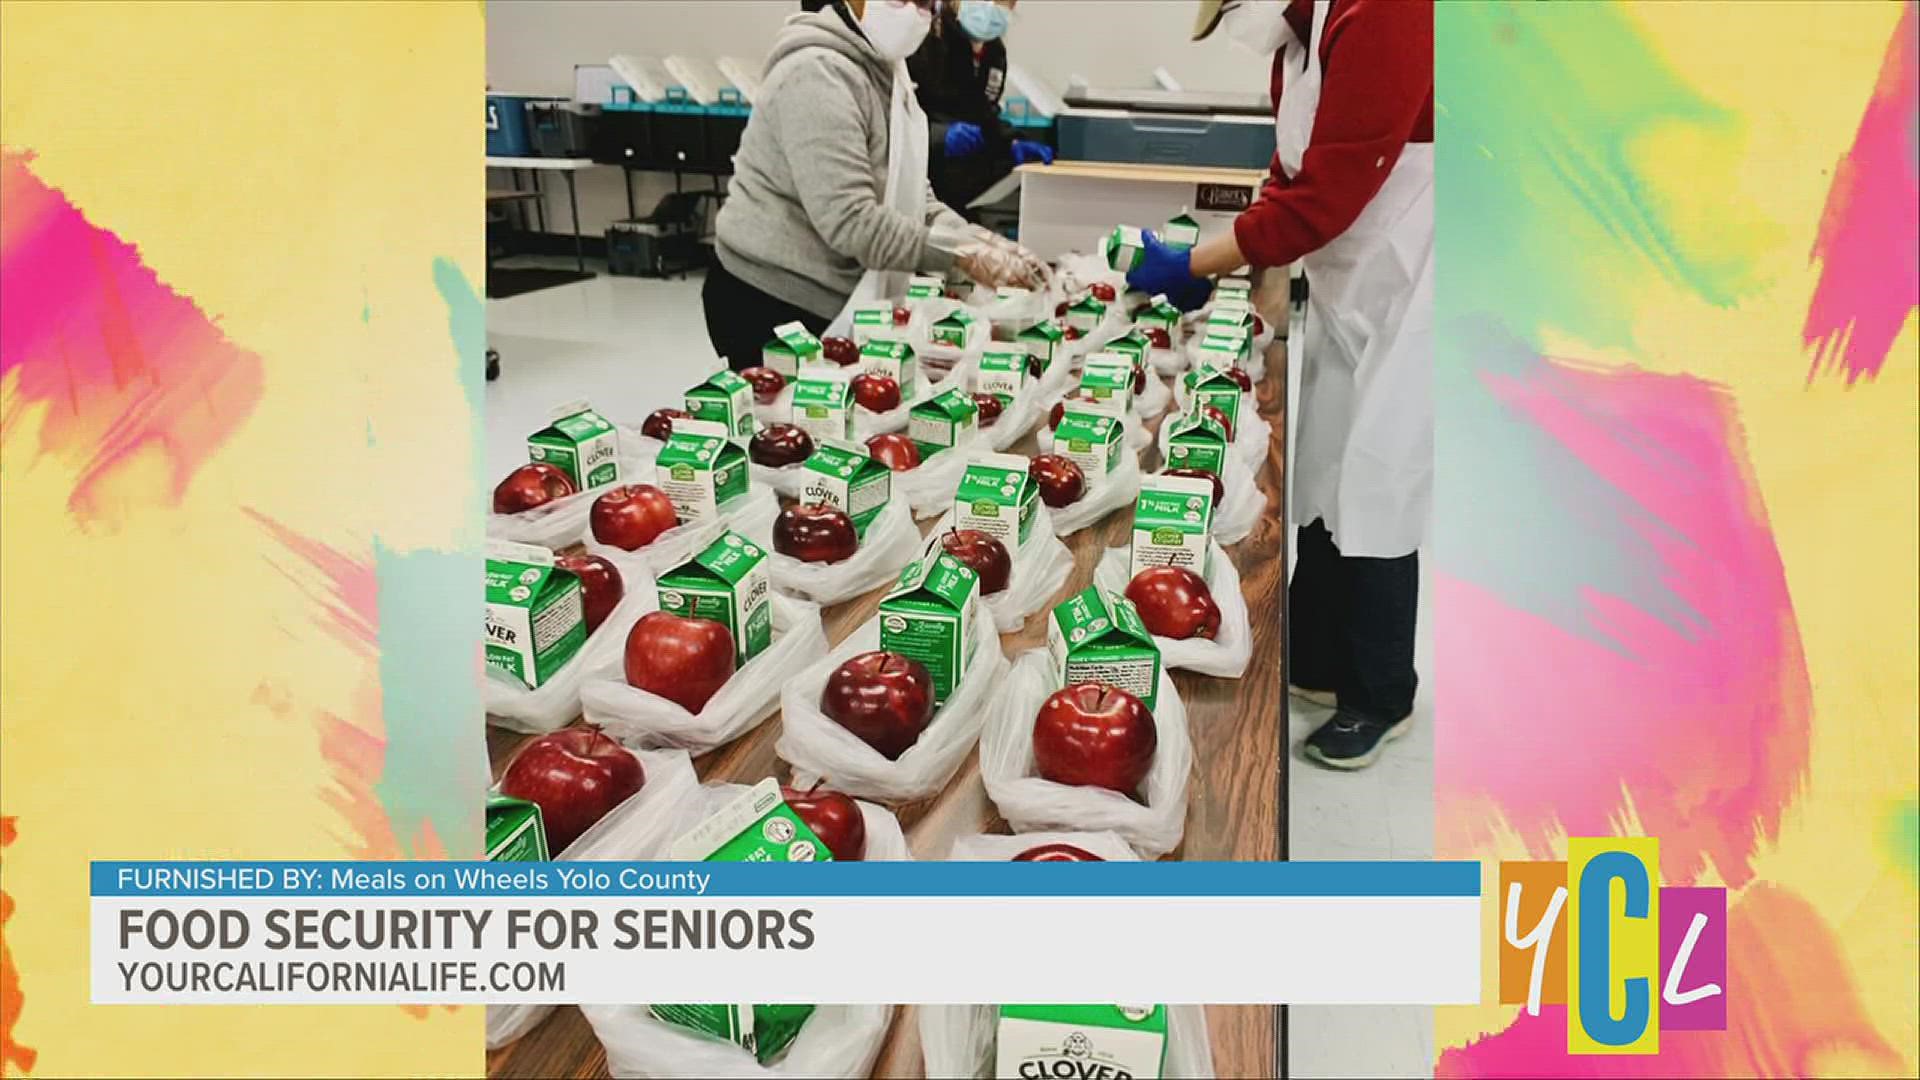 The Meals on Wheels in Yolo County is working towards driving food security for seniors in the community. Visit the website at the end of the segment to volunteer!